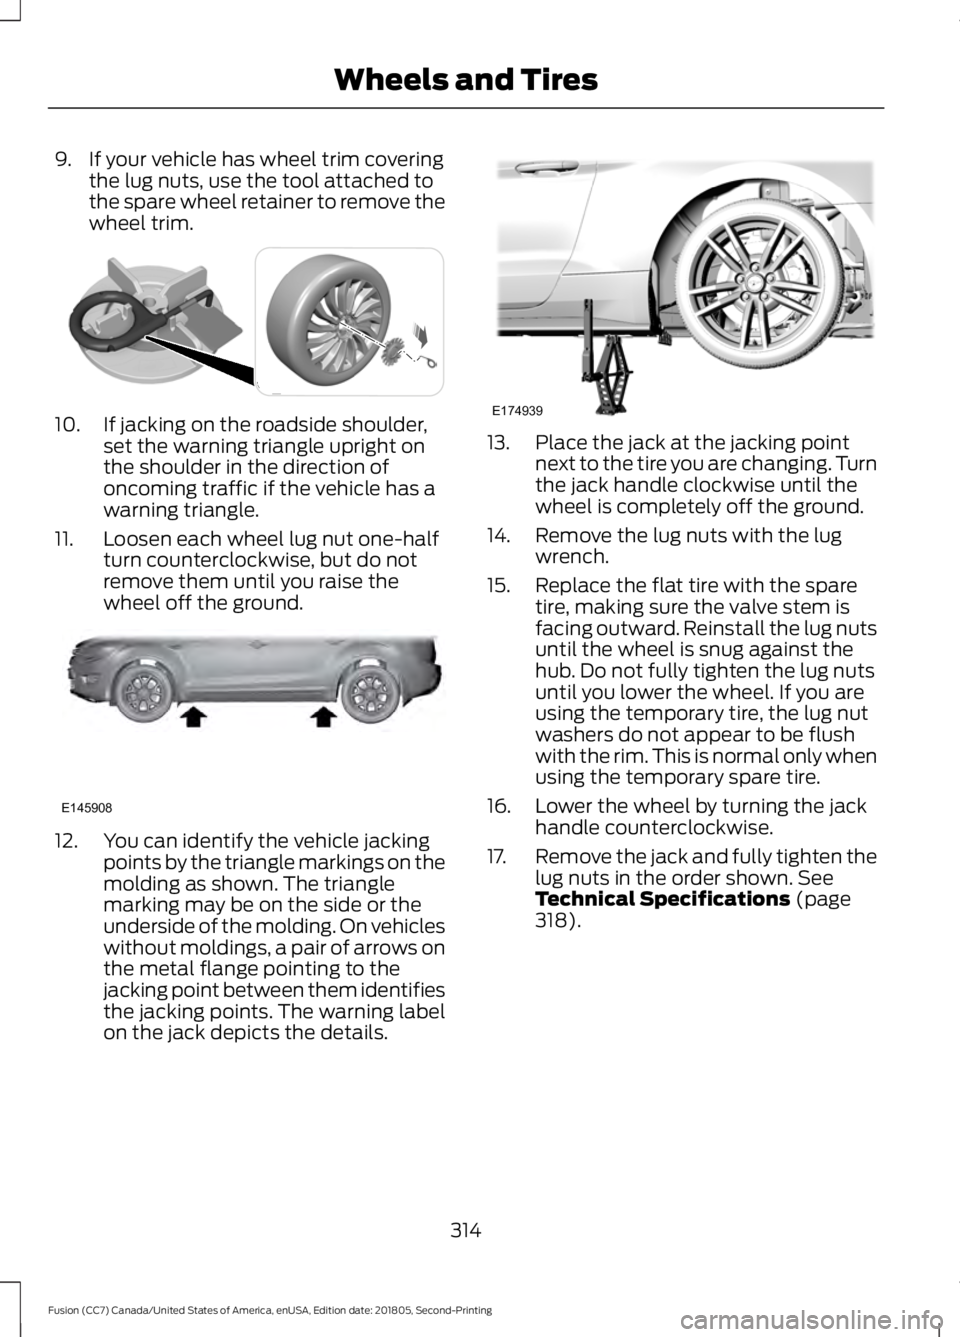 FORD FUSION 2019  Owners Manual 9. If your vehicle has wheel trim covering
the lug nuts, use the tool attached to
the spare wheel retainer to remove the
wheel trim. 10. If jacking on the roadside shoulder,
set the warning triangle u